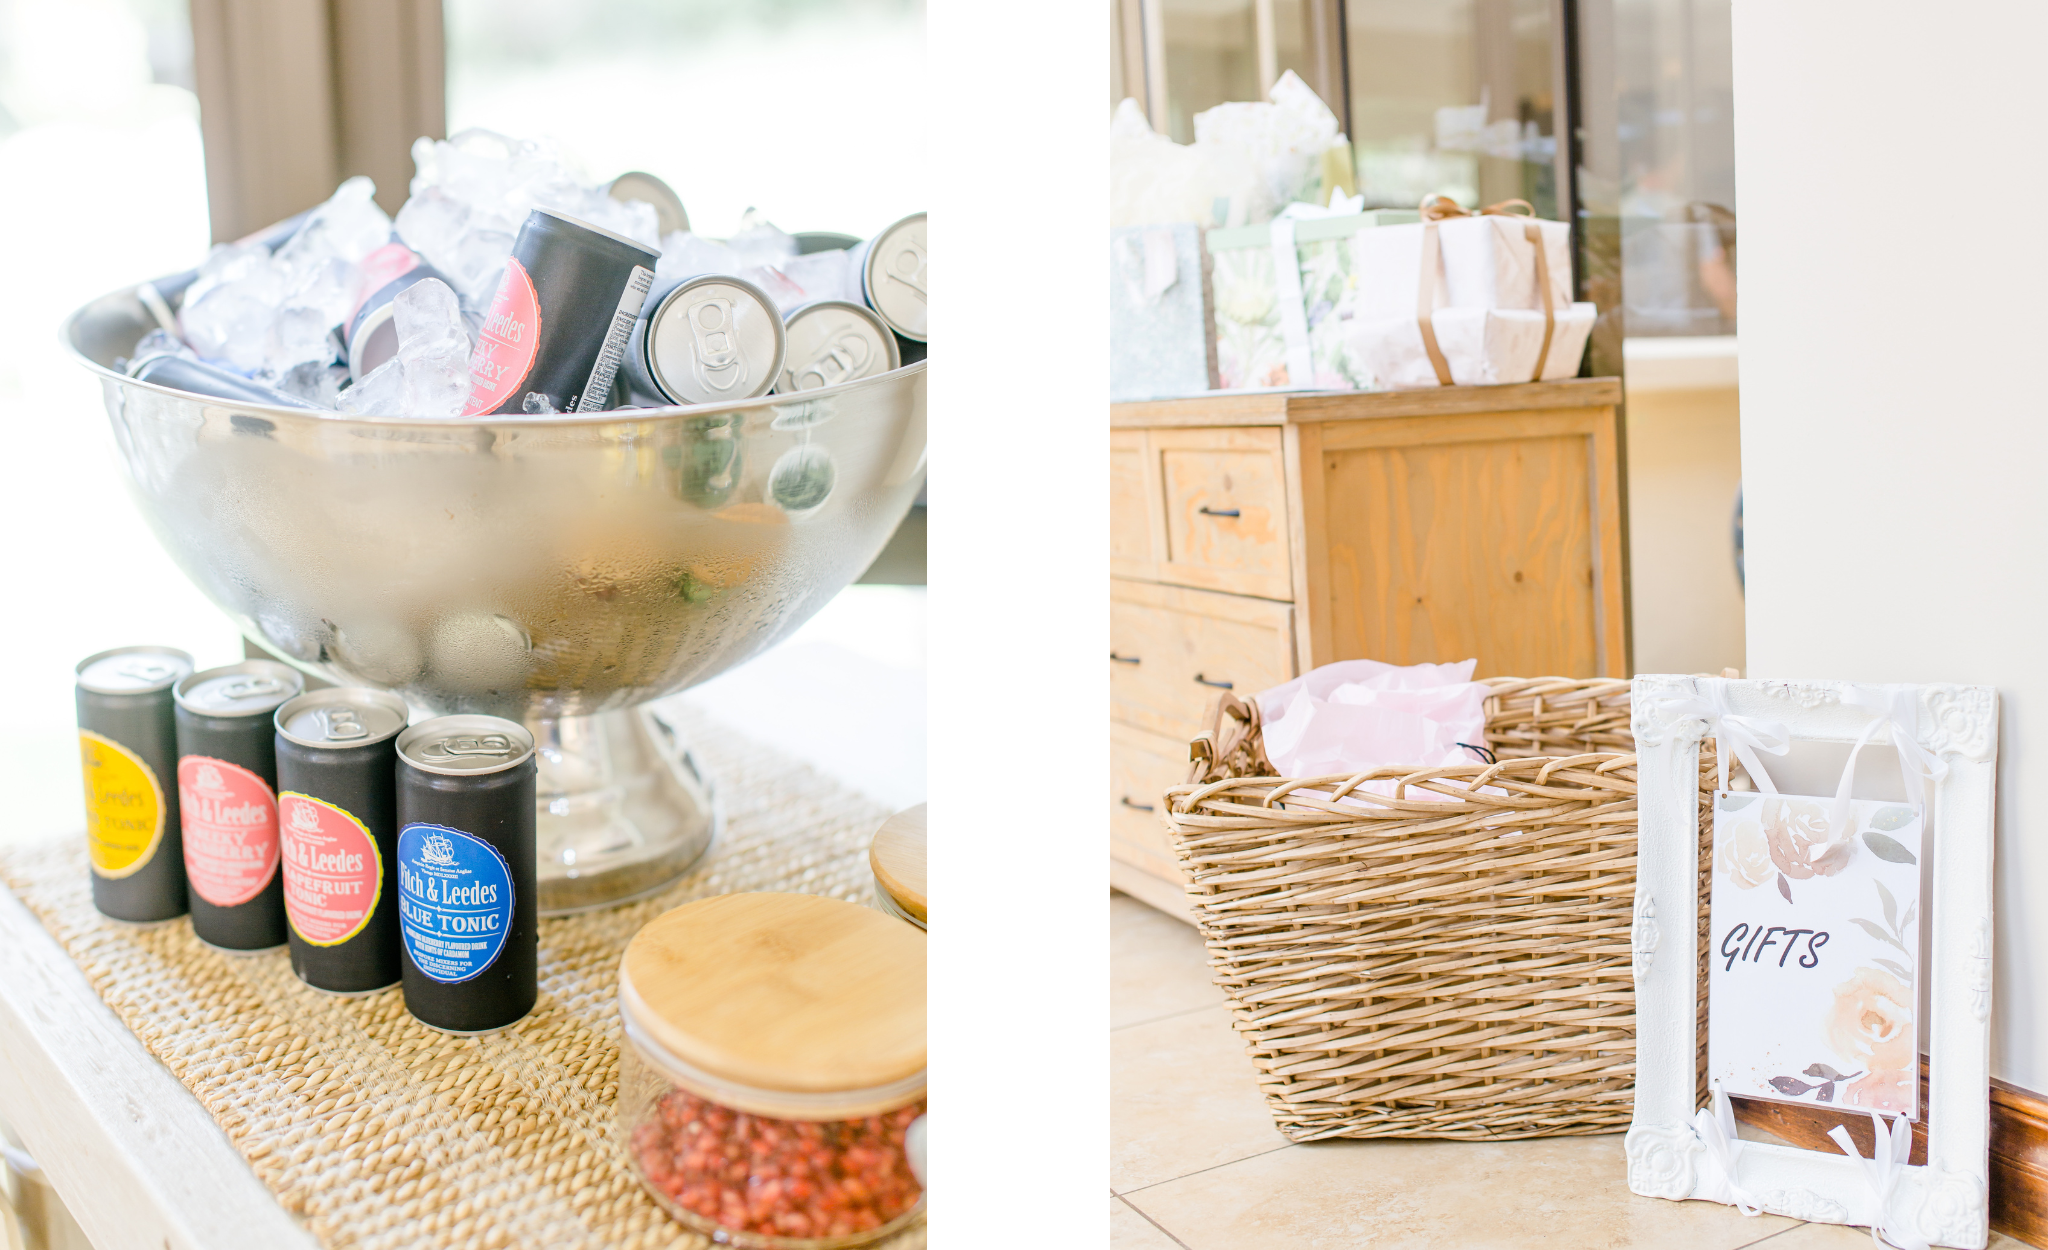 Enchanting Boho Kitchen Tea: A Picnic Perfection with Flower Crowns